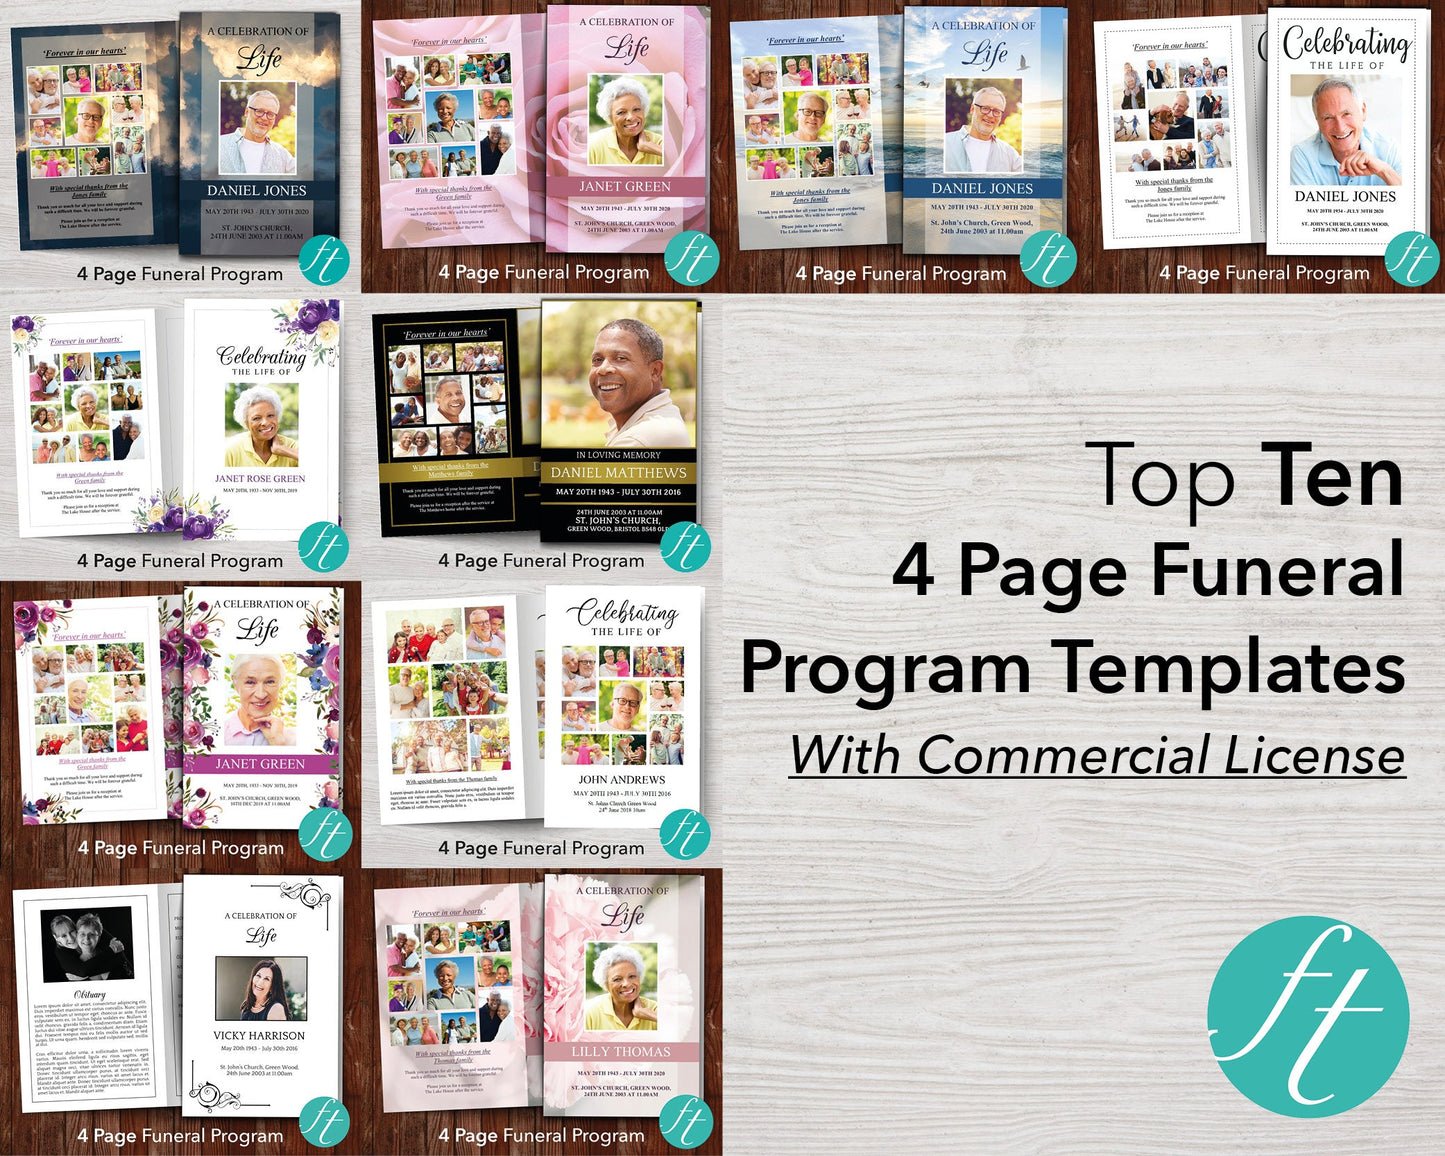 Top Ten 4-Page Funeral Program Templates (Commercial Licenses)